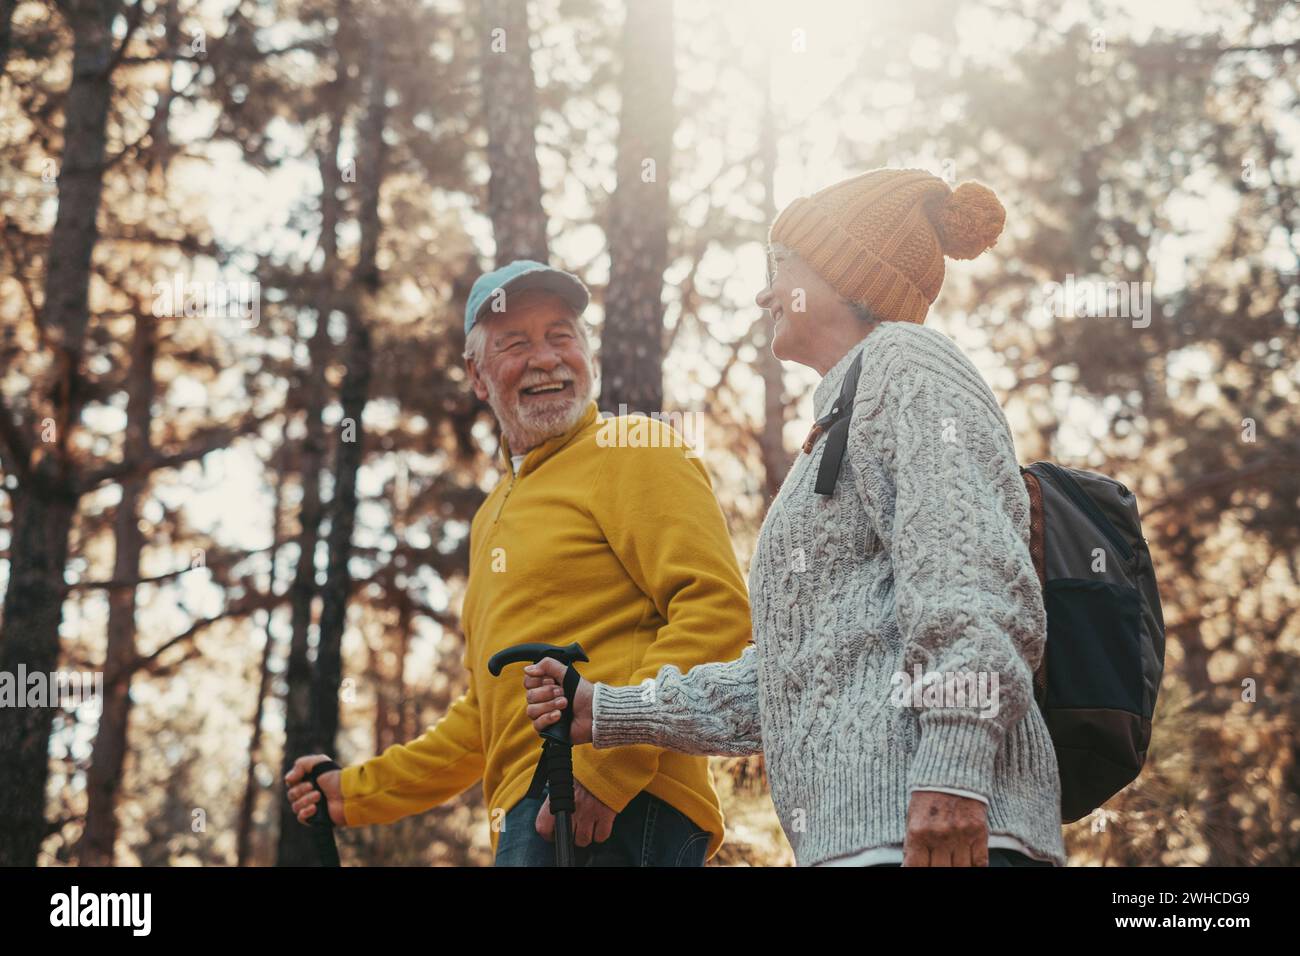 Portrait close up head shot of one cheerful smiling middle age woman walking with her husband enjoying free time and nature. Active beautiful seniors in love together at sunny day. Stock Photo